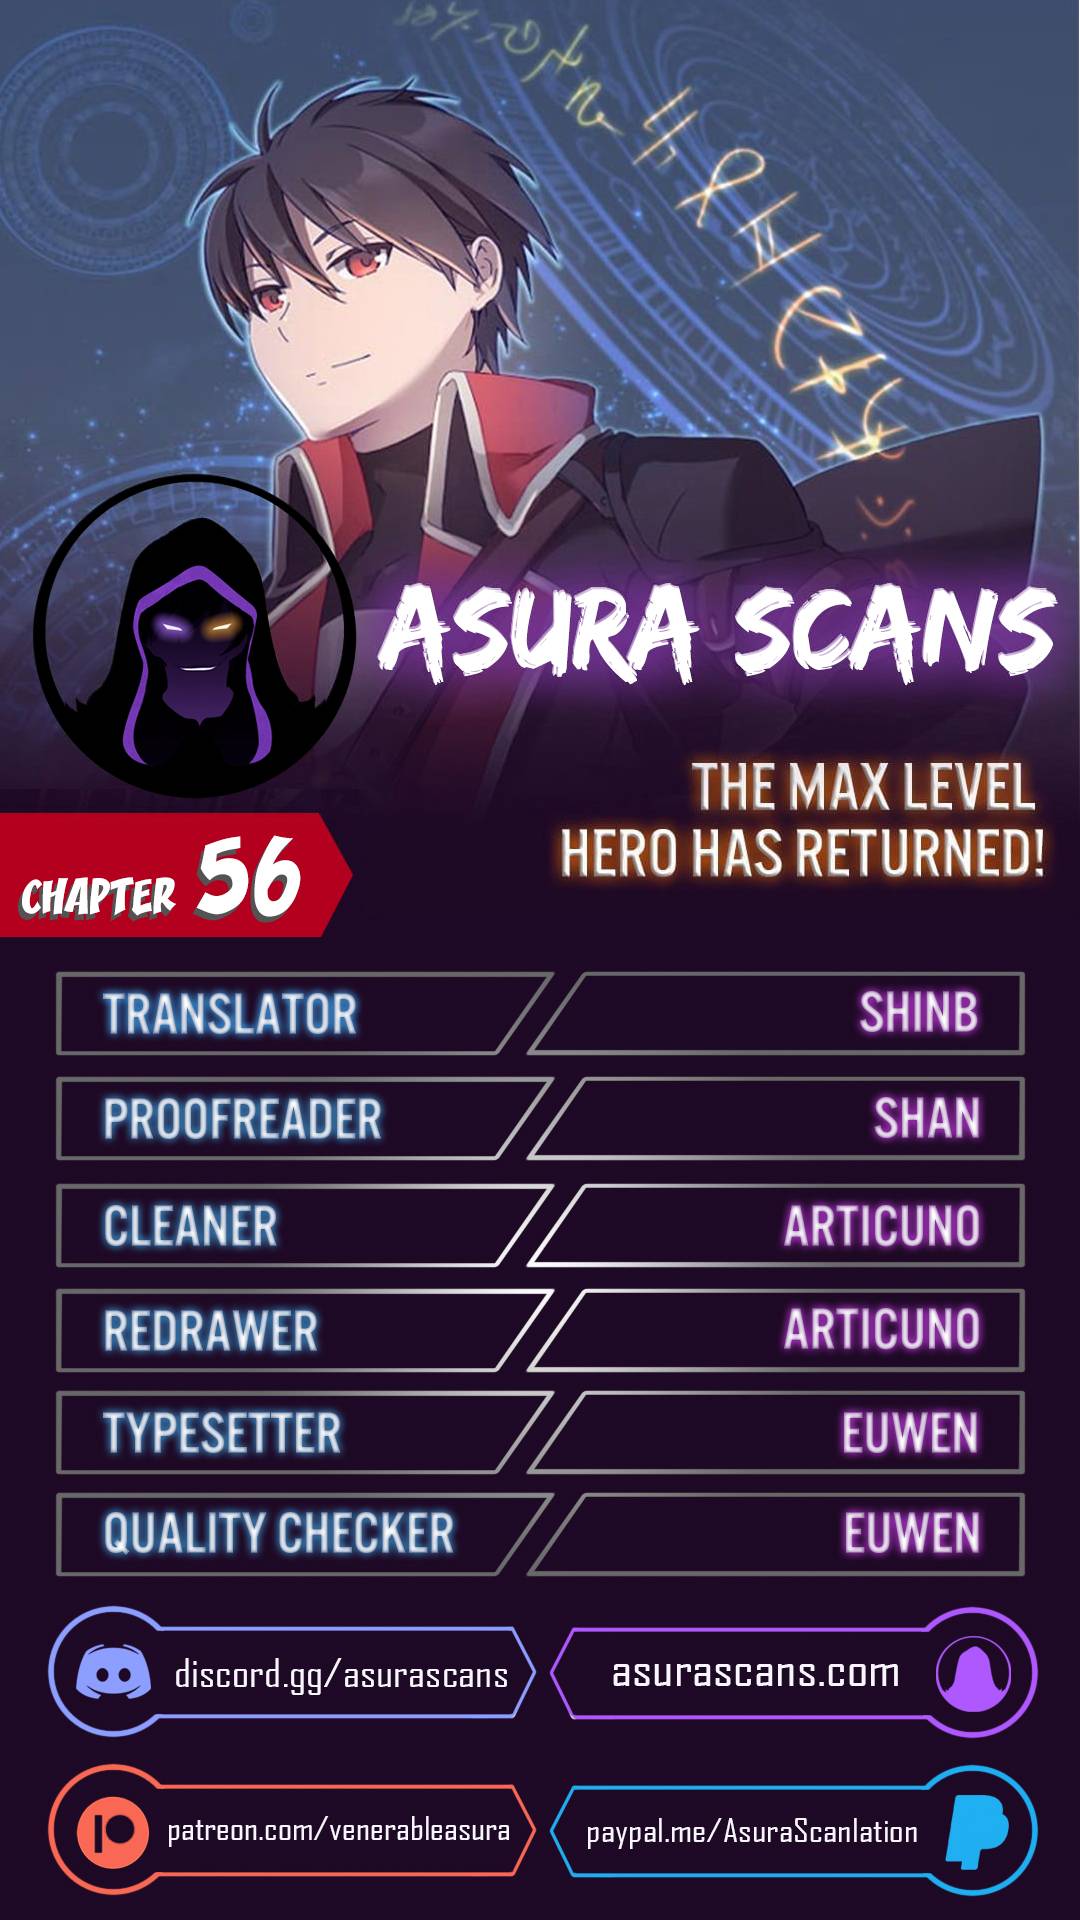 The MAX leveled hero will return! Chapter 56